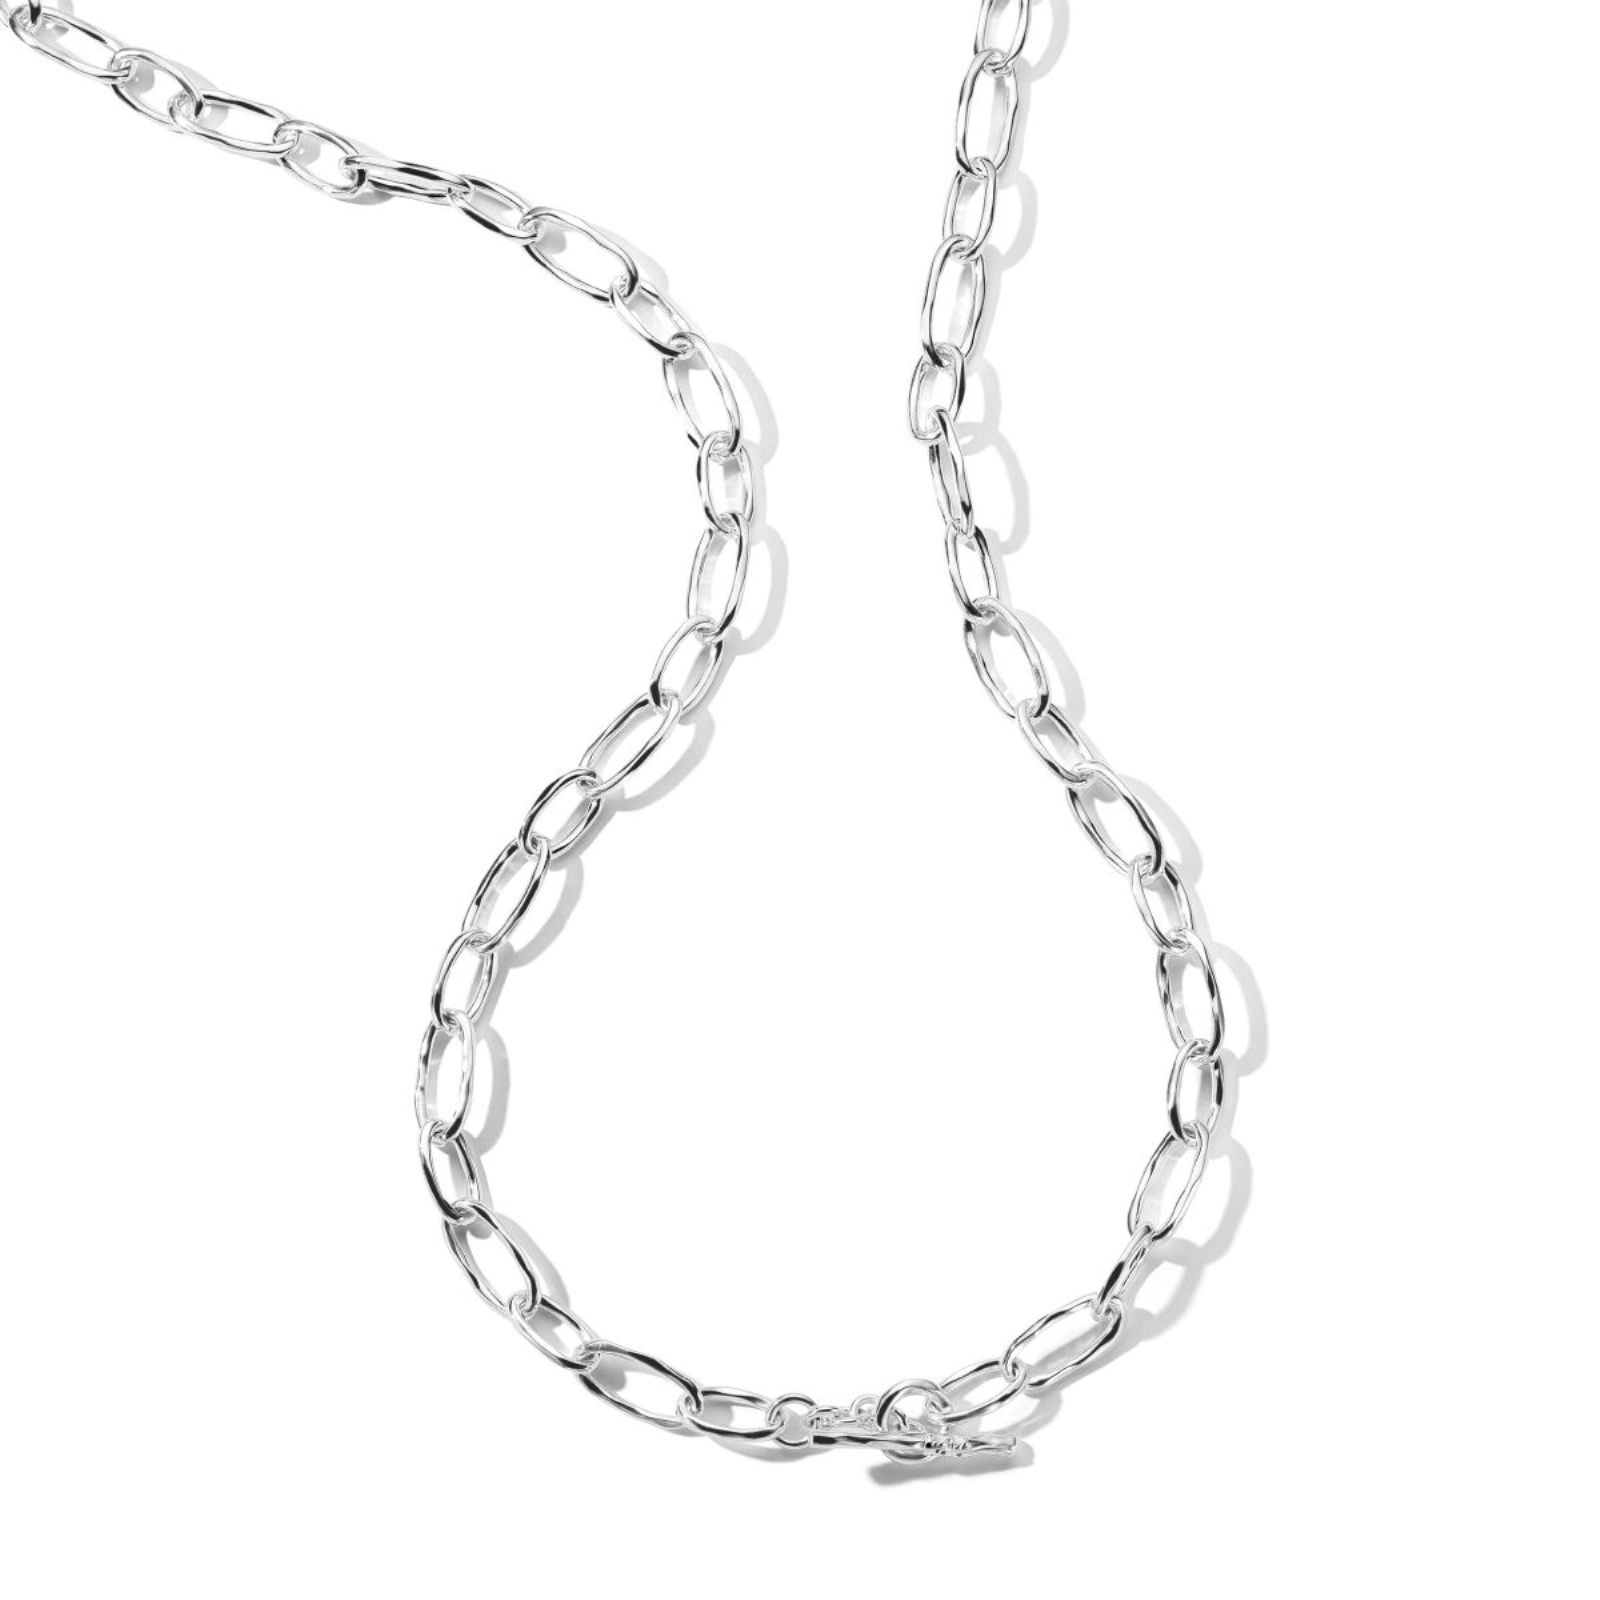 Silver Faceted Oval Link Classico Necklace